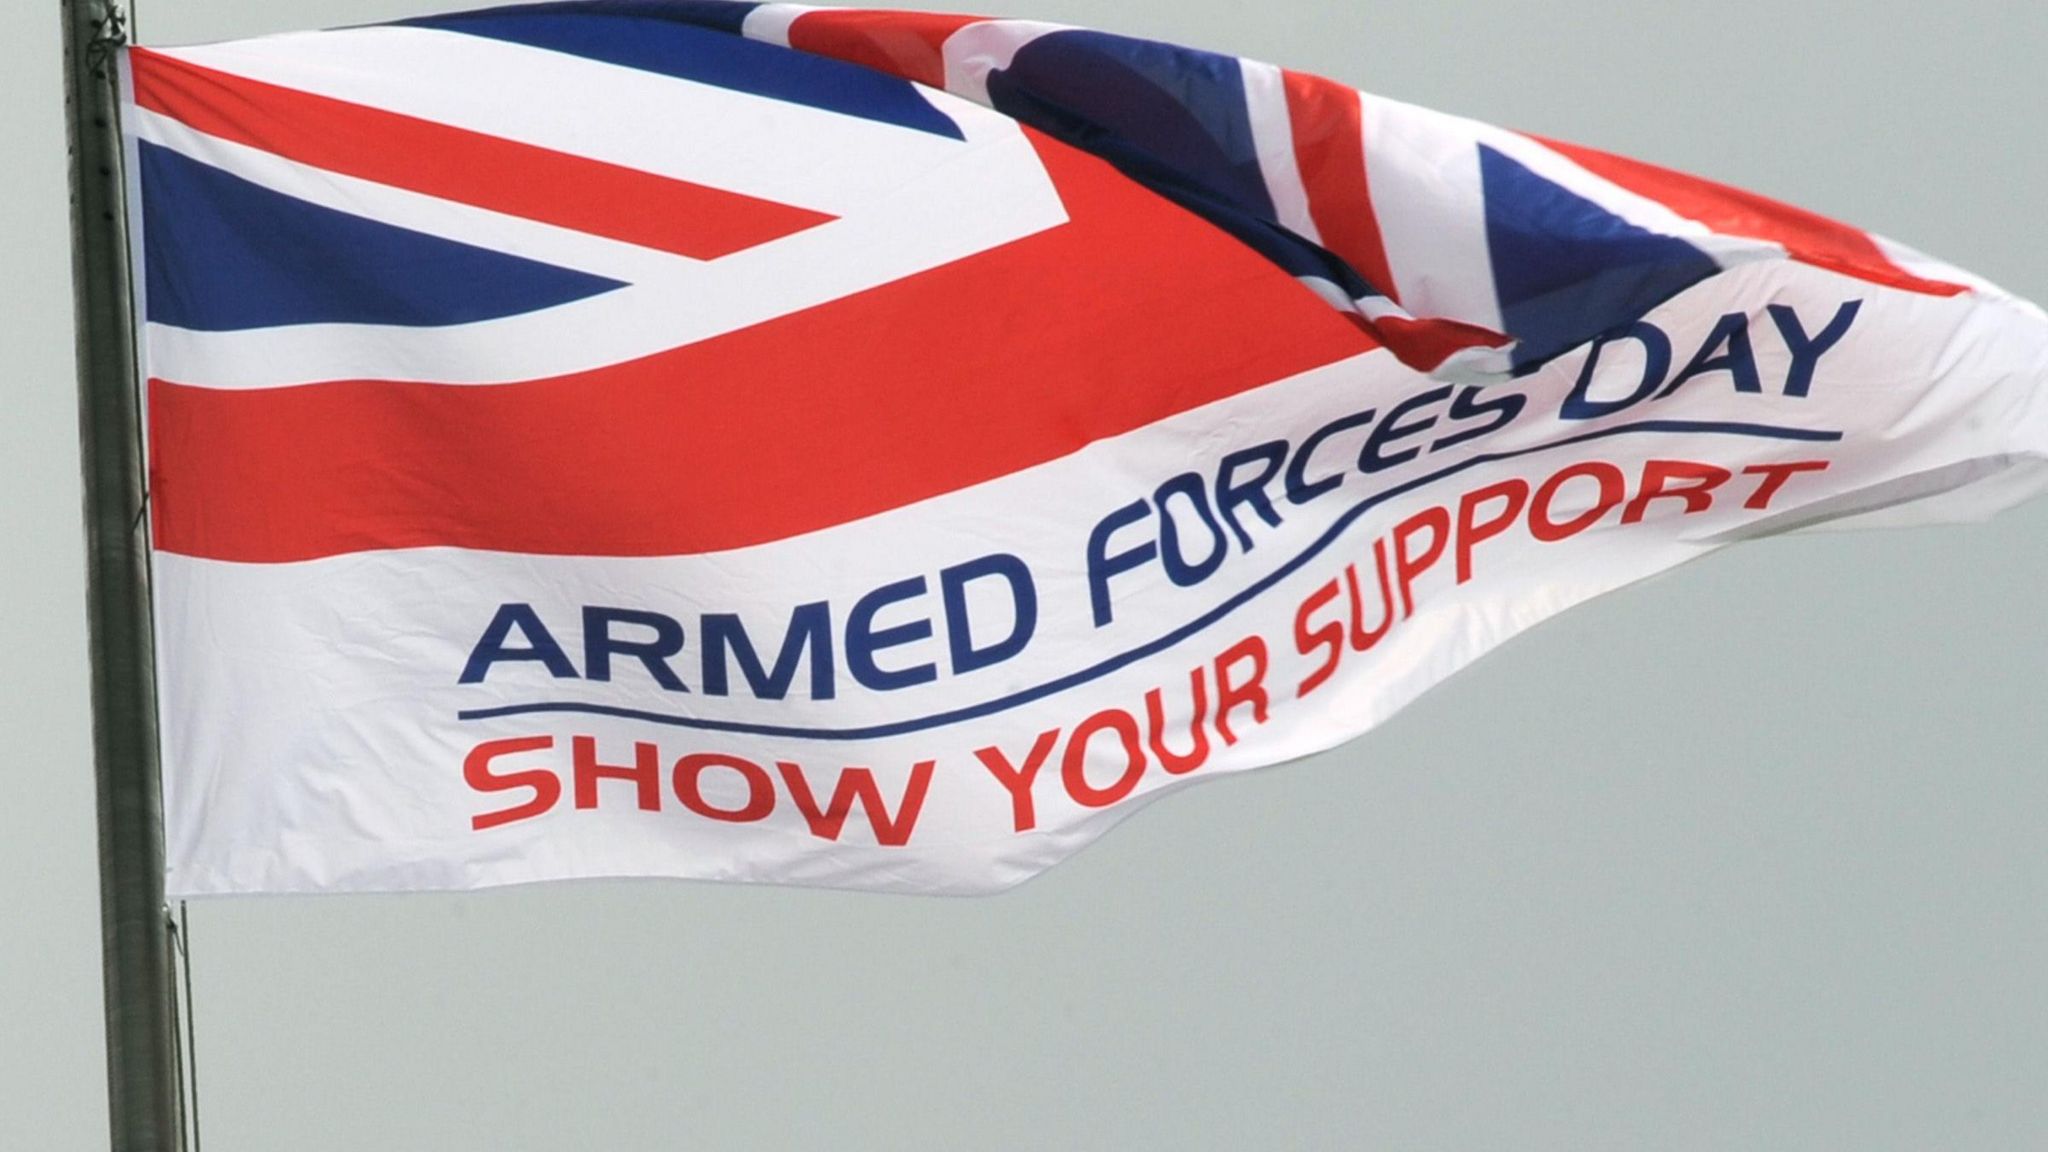 An armed forces union flag